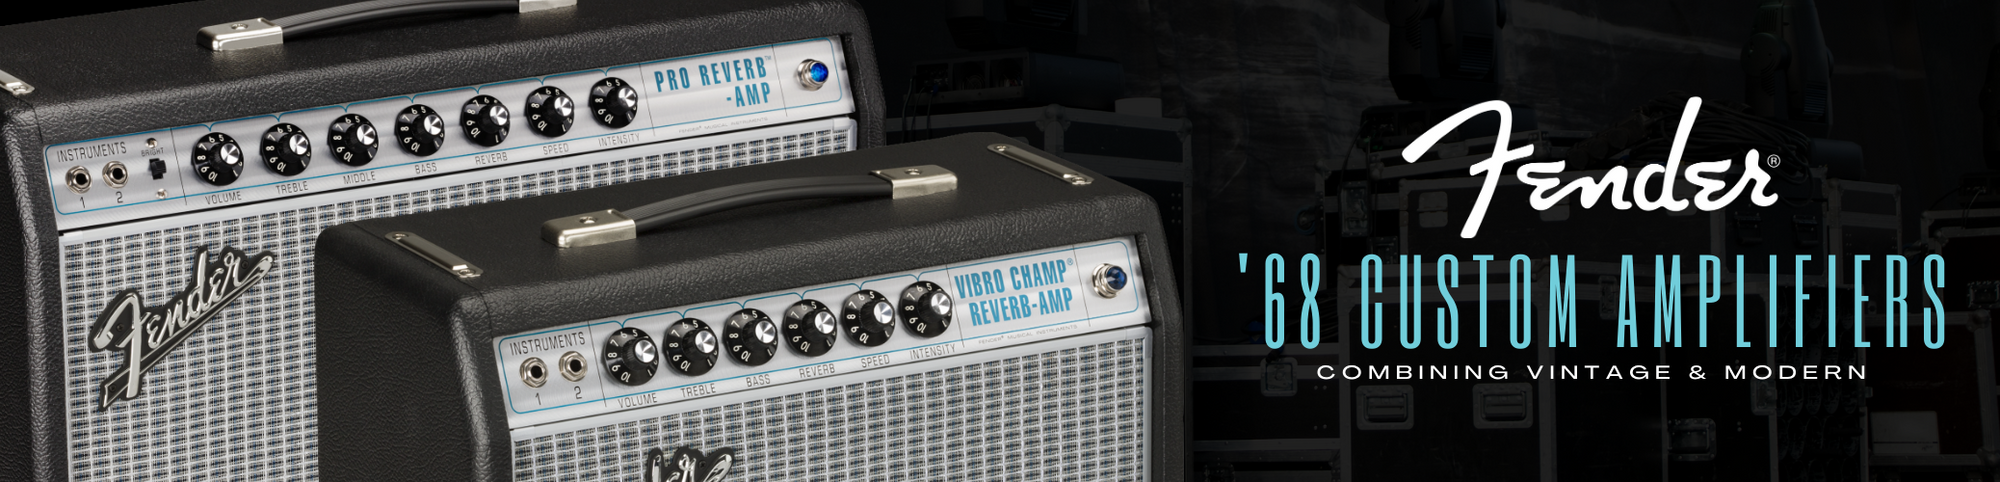 A look inside the new Fender Pro Reverb & Vibro Champ Reverb '68 Custom Amplifiers.-Sky Music